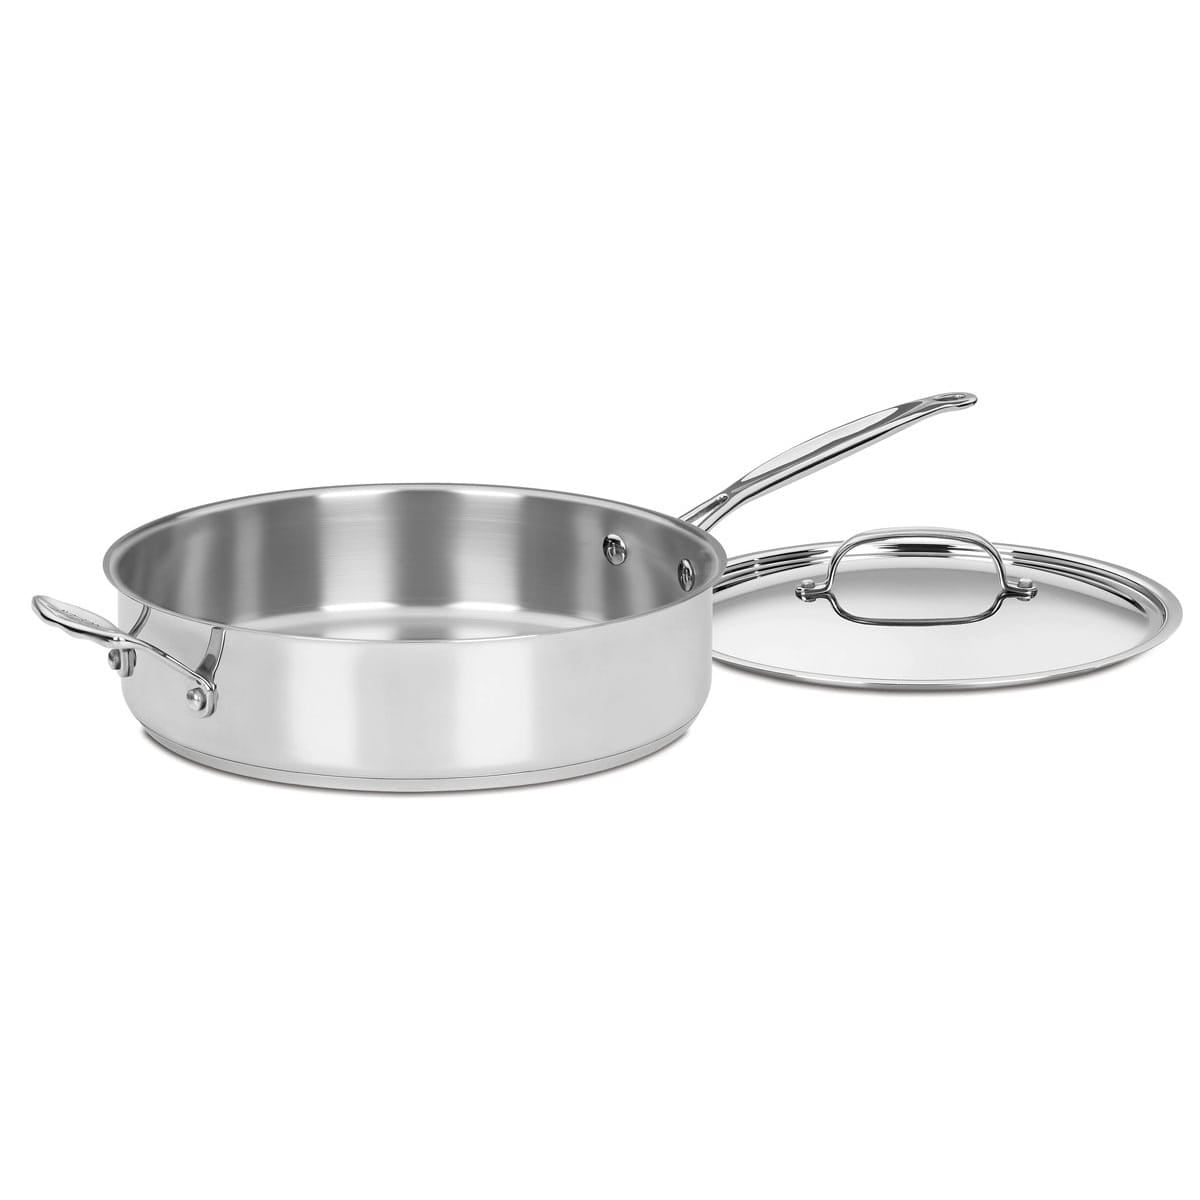 Chef's Classic Stainless Steel 10-inch Nonstick Skillet